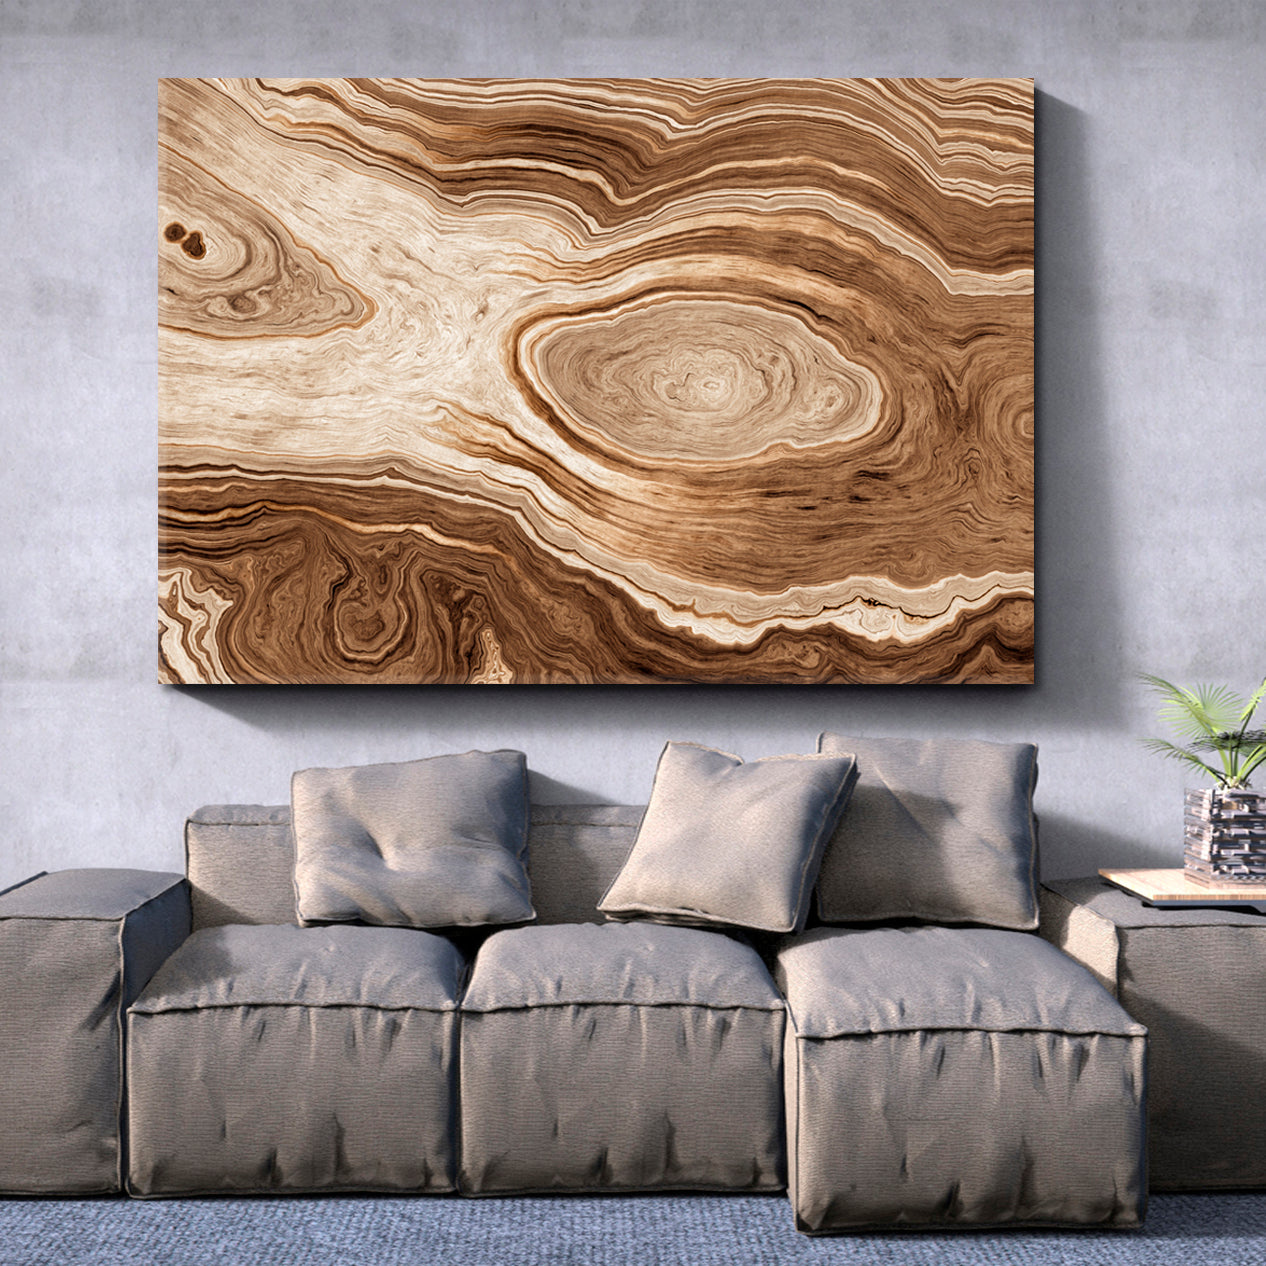 ABSTRACT Wavy Lines Age Growth Rings Oak Big Tree Trunk Slice Cut Woods Abstract Art Print Artesty   